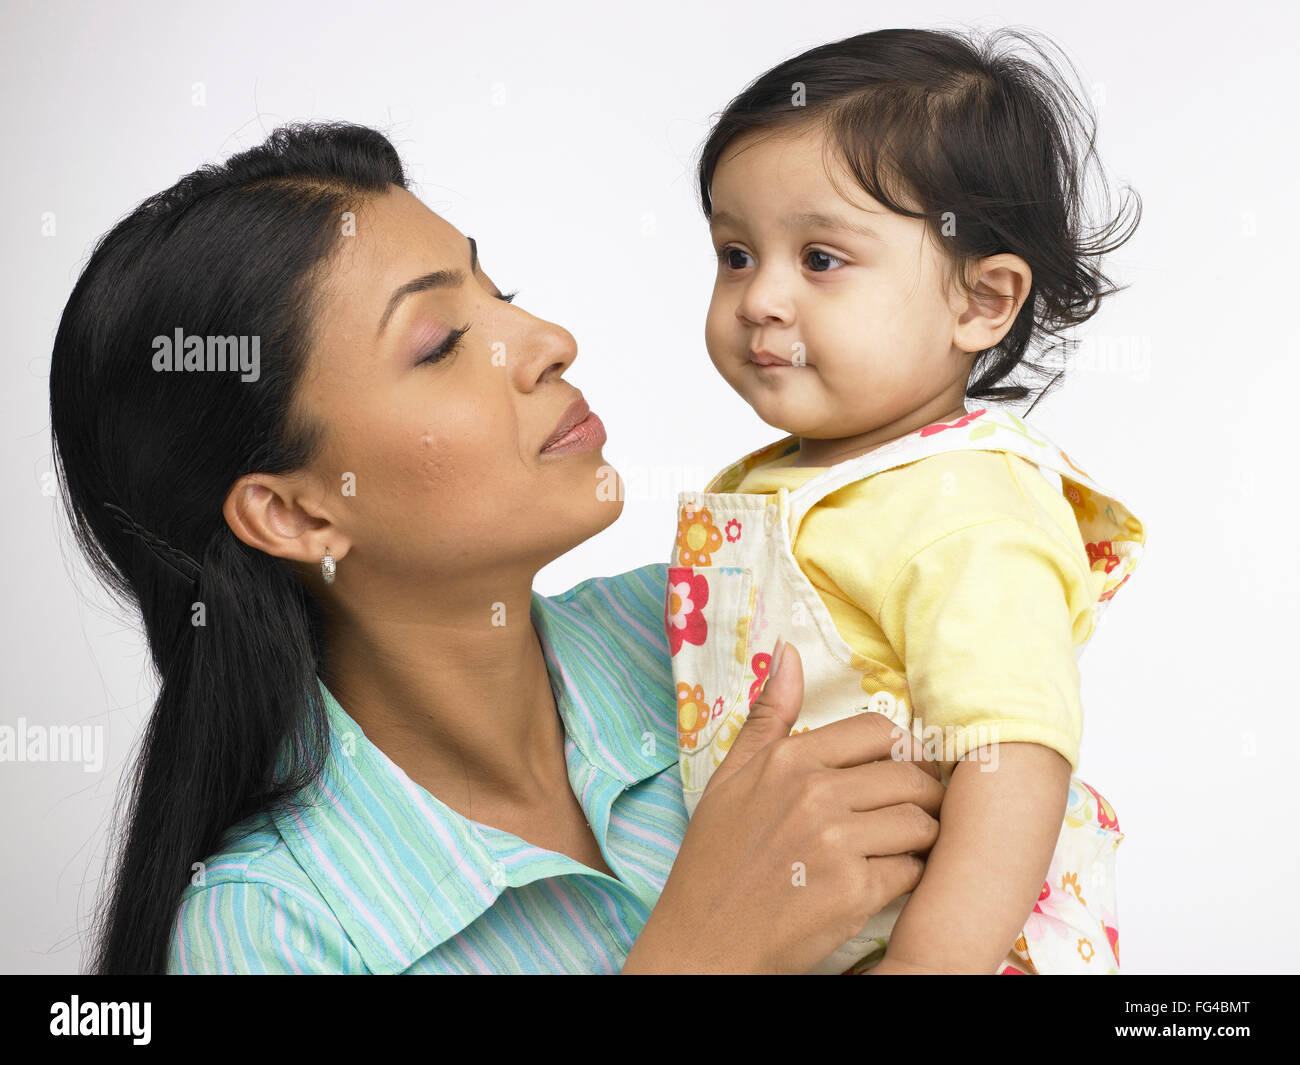 Indian baby, Hello I saw this baby with her mother and she …